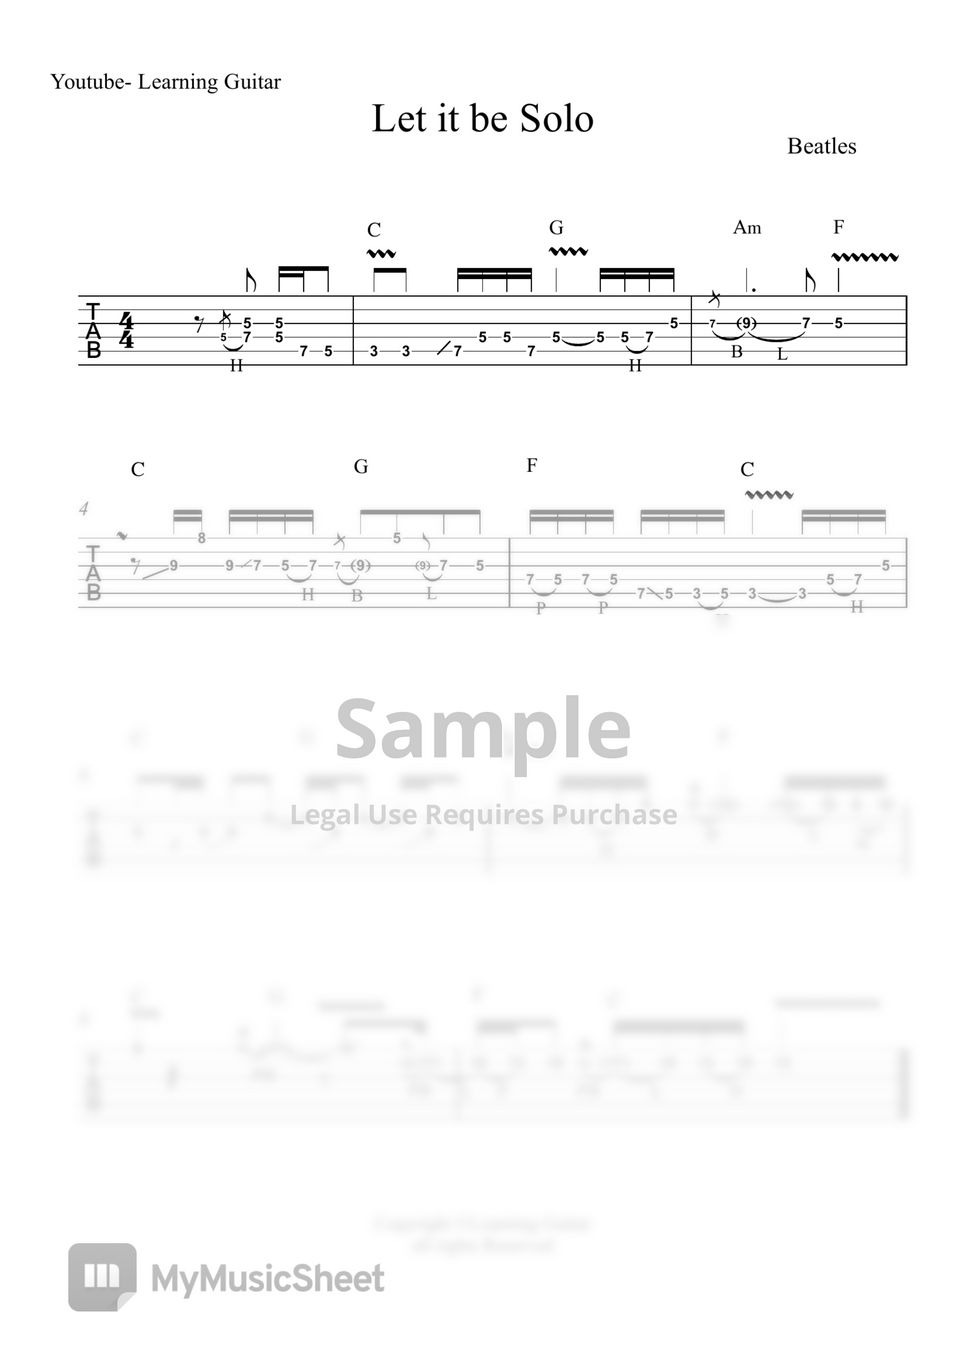 Beatles - Let it Be Guitar Solo (TAB) by Learning Guitar